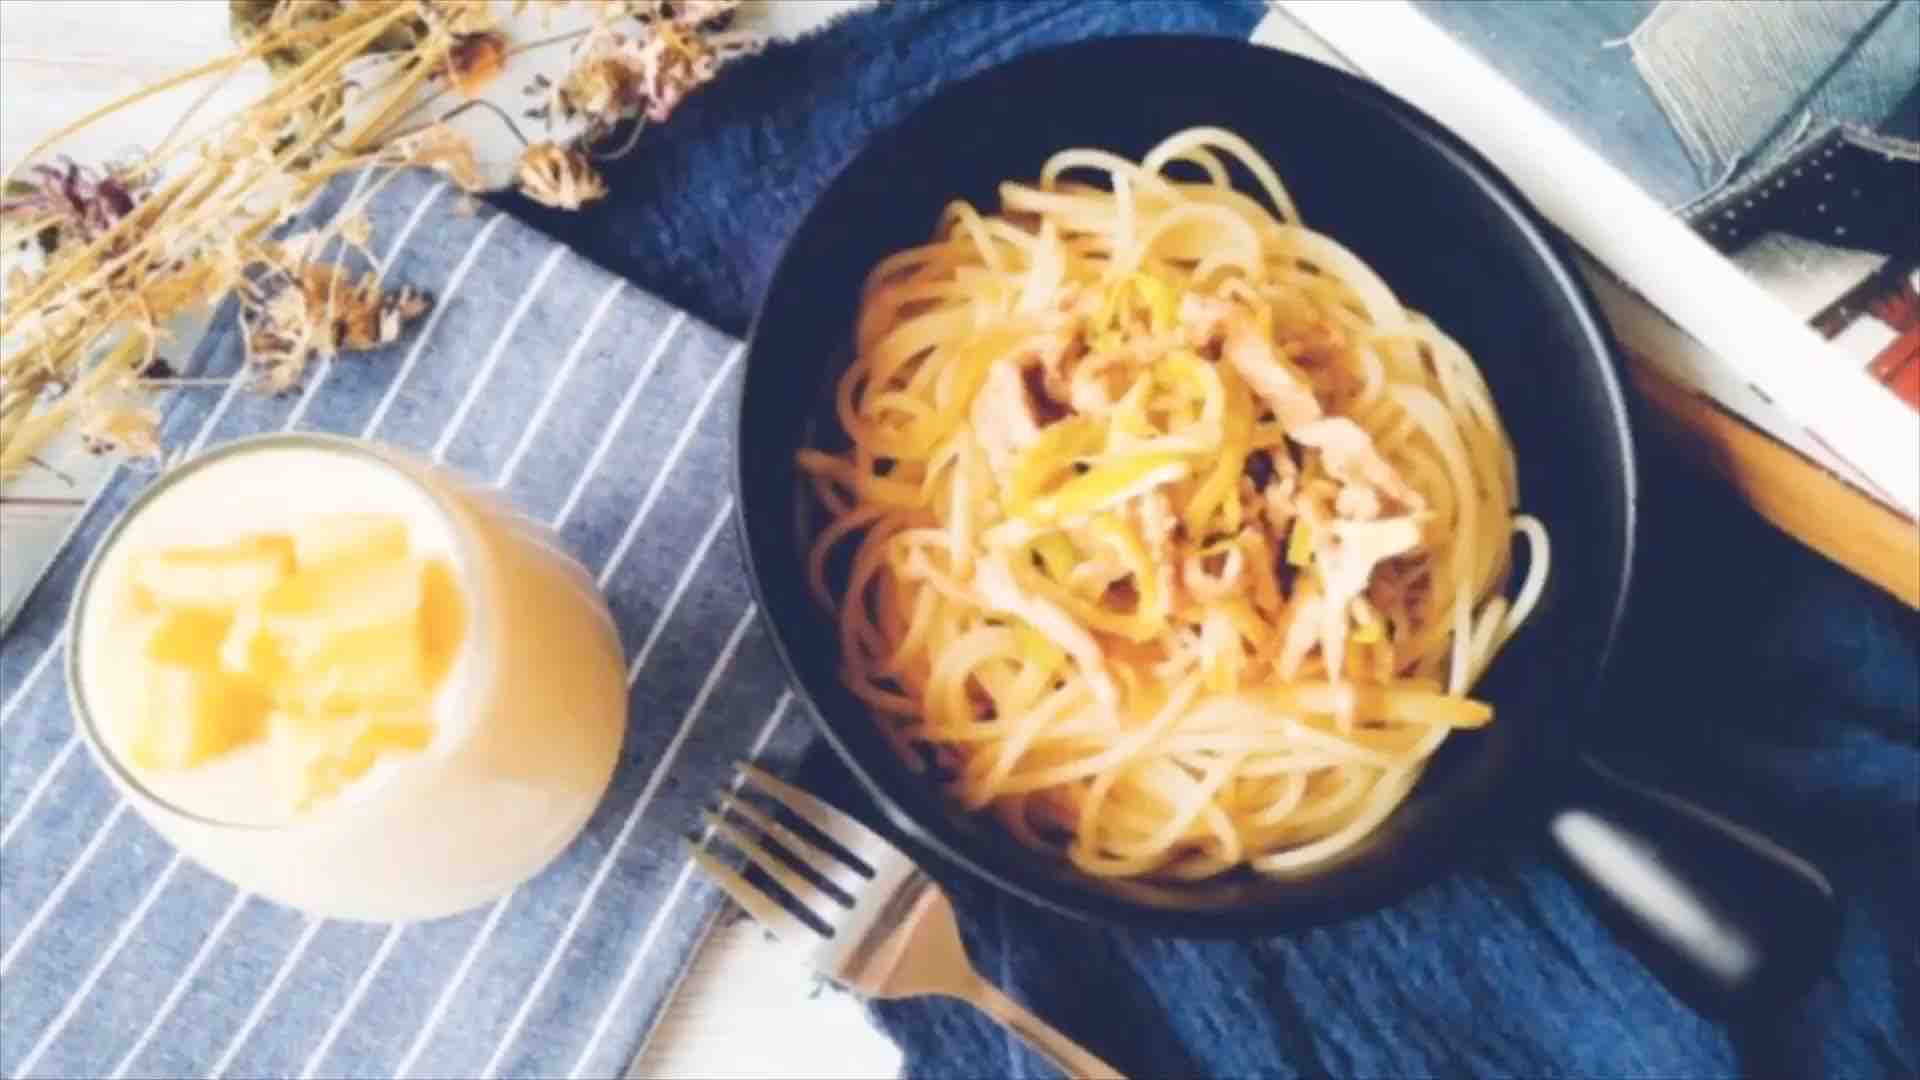 Food in One Pot: Braised Noodles with Small Mackerel Fish recipe